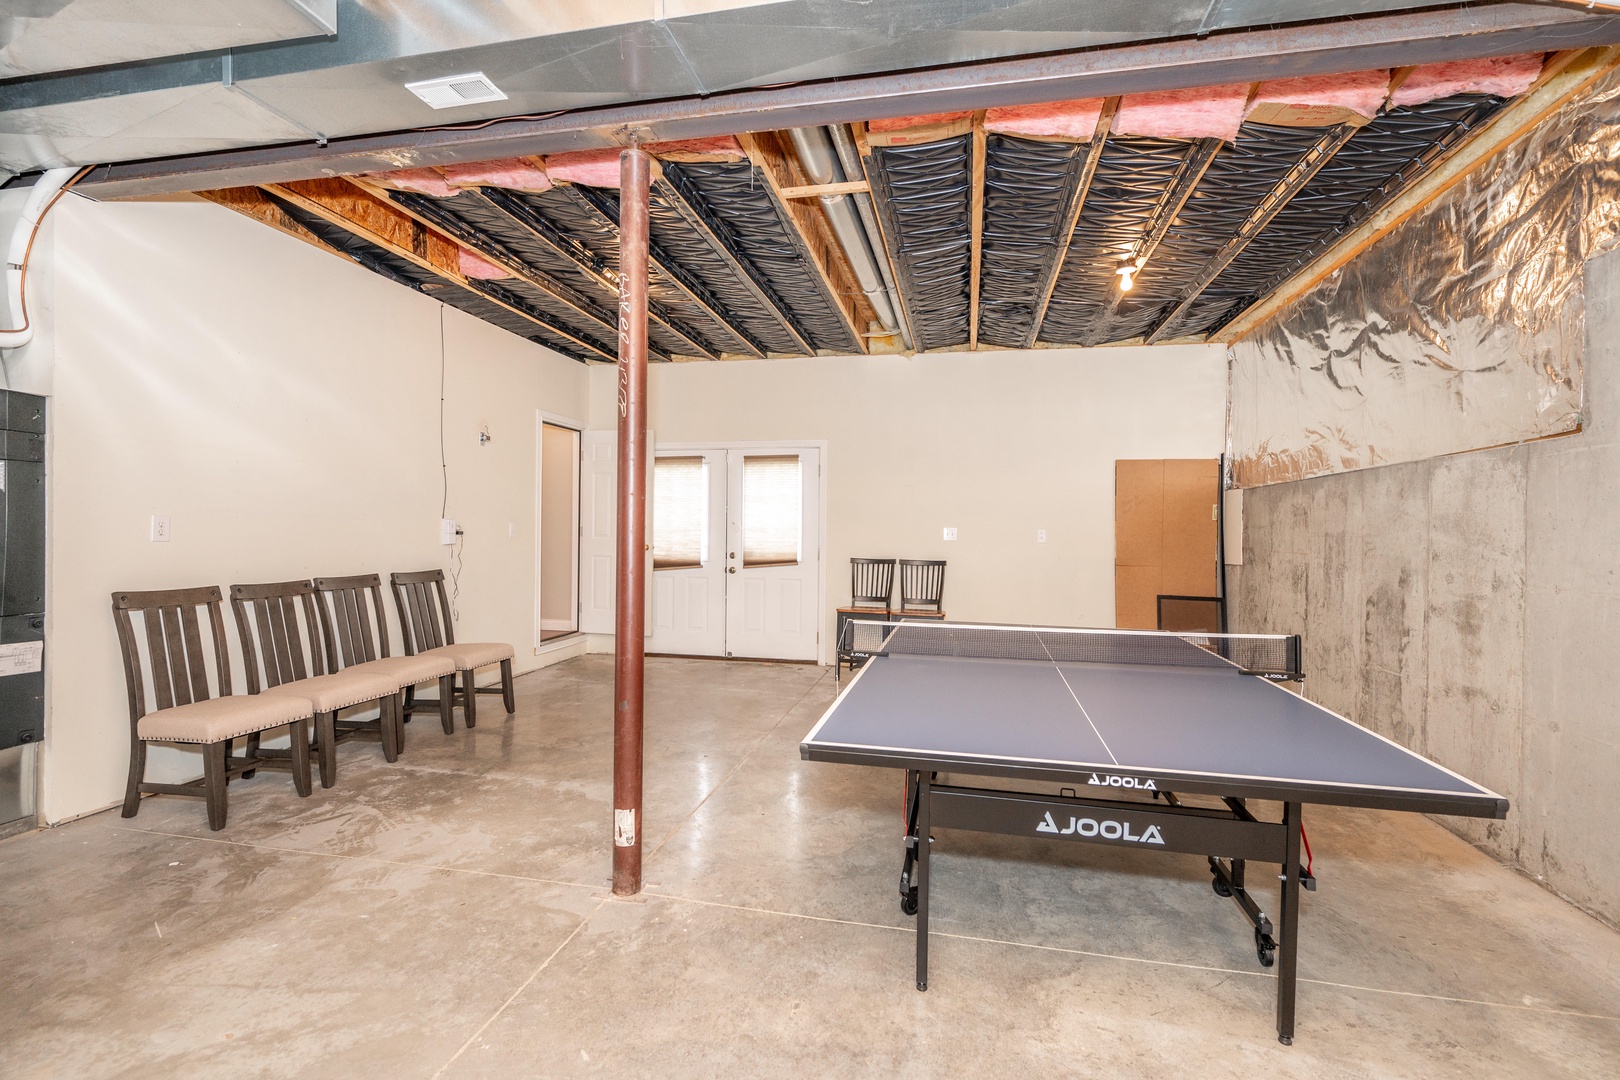 Basement game room with ping pong table